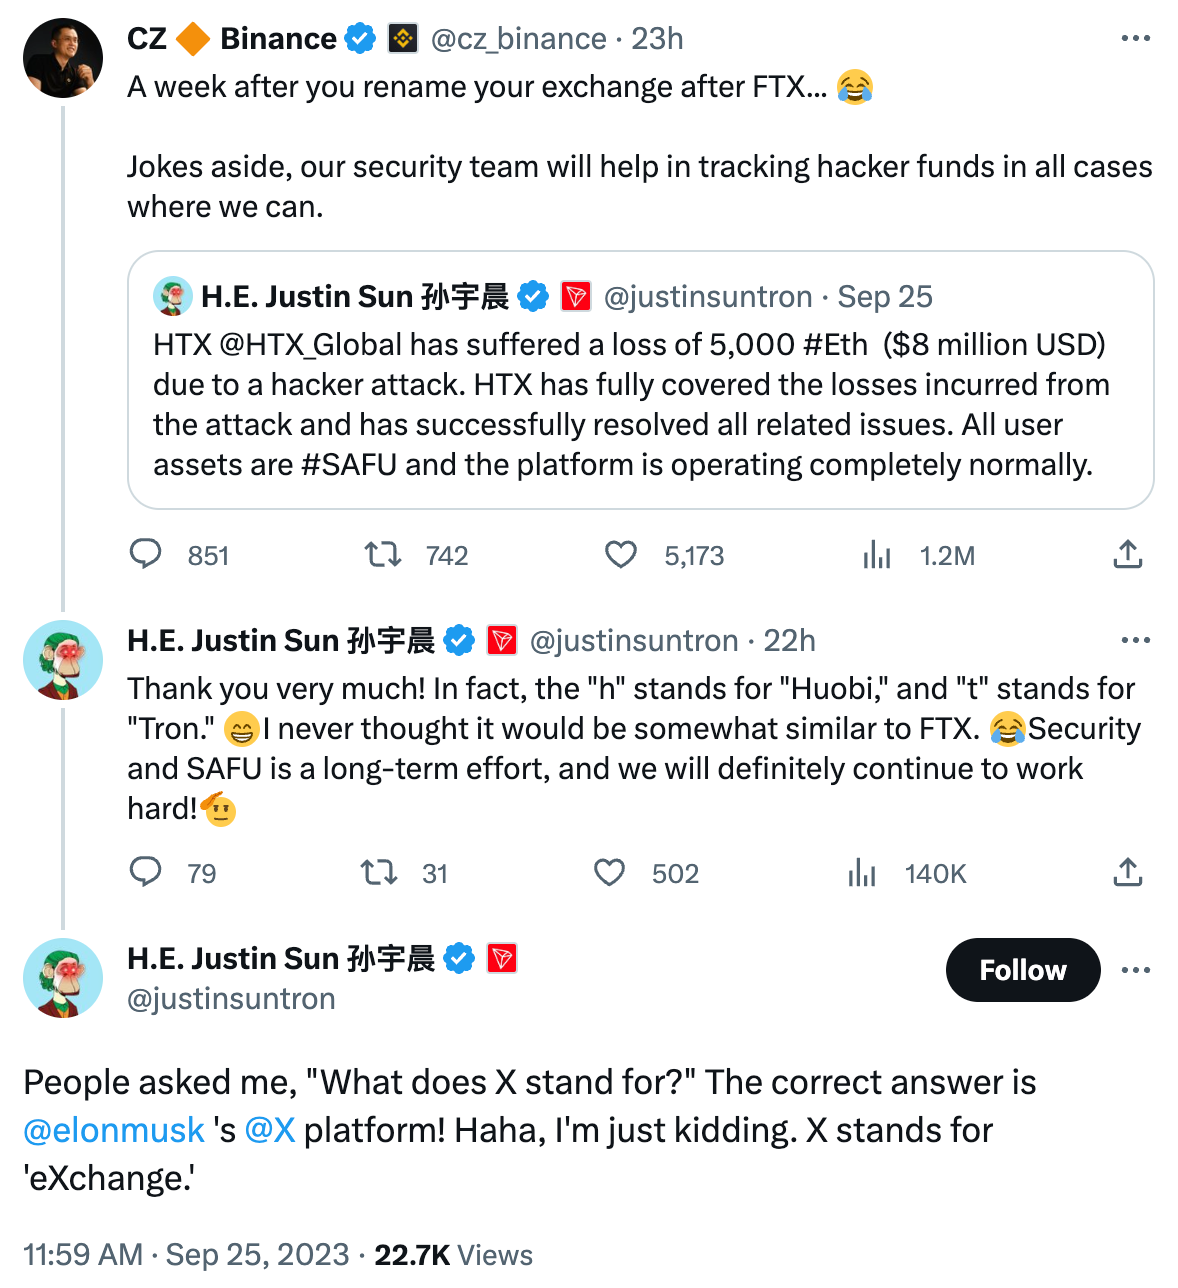  CZ 🔶 Binance  @cz_binance · 23h A week after you rename your exchange after FTX... 😂  Jokes aside, our security team will help in tracking hacker funds in all cases where we can. Quote H.E. Justin Sun 孙宇晨  @justinsuntron · Sep 25 HTX @HTX_Global has suffered a loss of 5,000 #Eth  ($8 million USD) due to a hacker attack. HTX has fully covered the losses incurred from the attack and has successfully resolved all related issues. All user assets are #SAFU and the platform is operating completely normally. H.E. Justin Sun 孙宇晨  @justinsuntron · 22h Thank you very much! In fact, the "h" stands for "Huobi," and "t" stands for "Tron." 😁I never thought it would be somewhat similar to FTX. 😂Security and SAFU is a long-term effort, and we will definitely continue to work hard!🫡 H.E. Justin Sun 孙宇晨  @justinsuntron People asked me, "What does X stand for?" The correct answer is  @elonmusk  's  @X  platform! Haha, I'm just kidding. X stands for 'eXchange.'